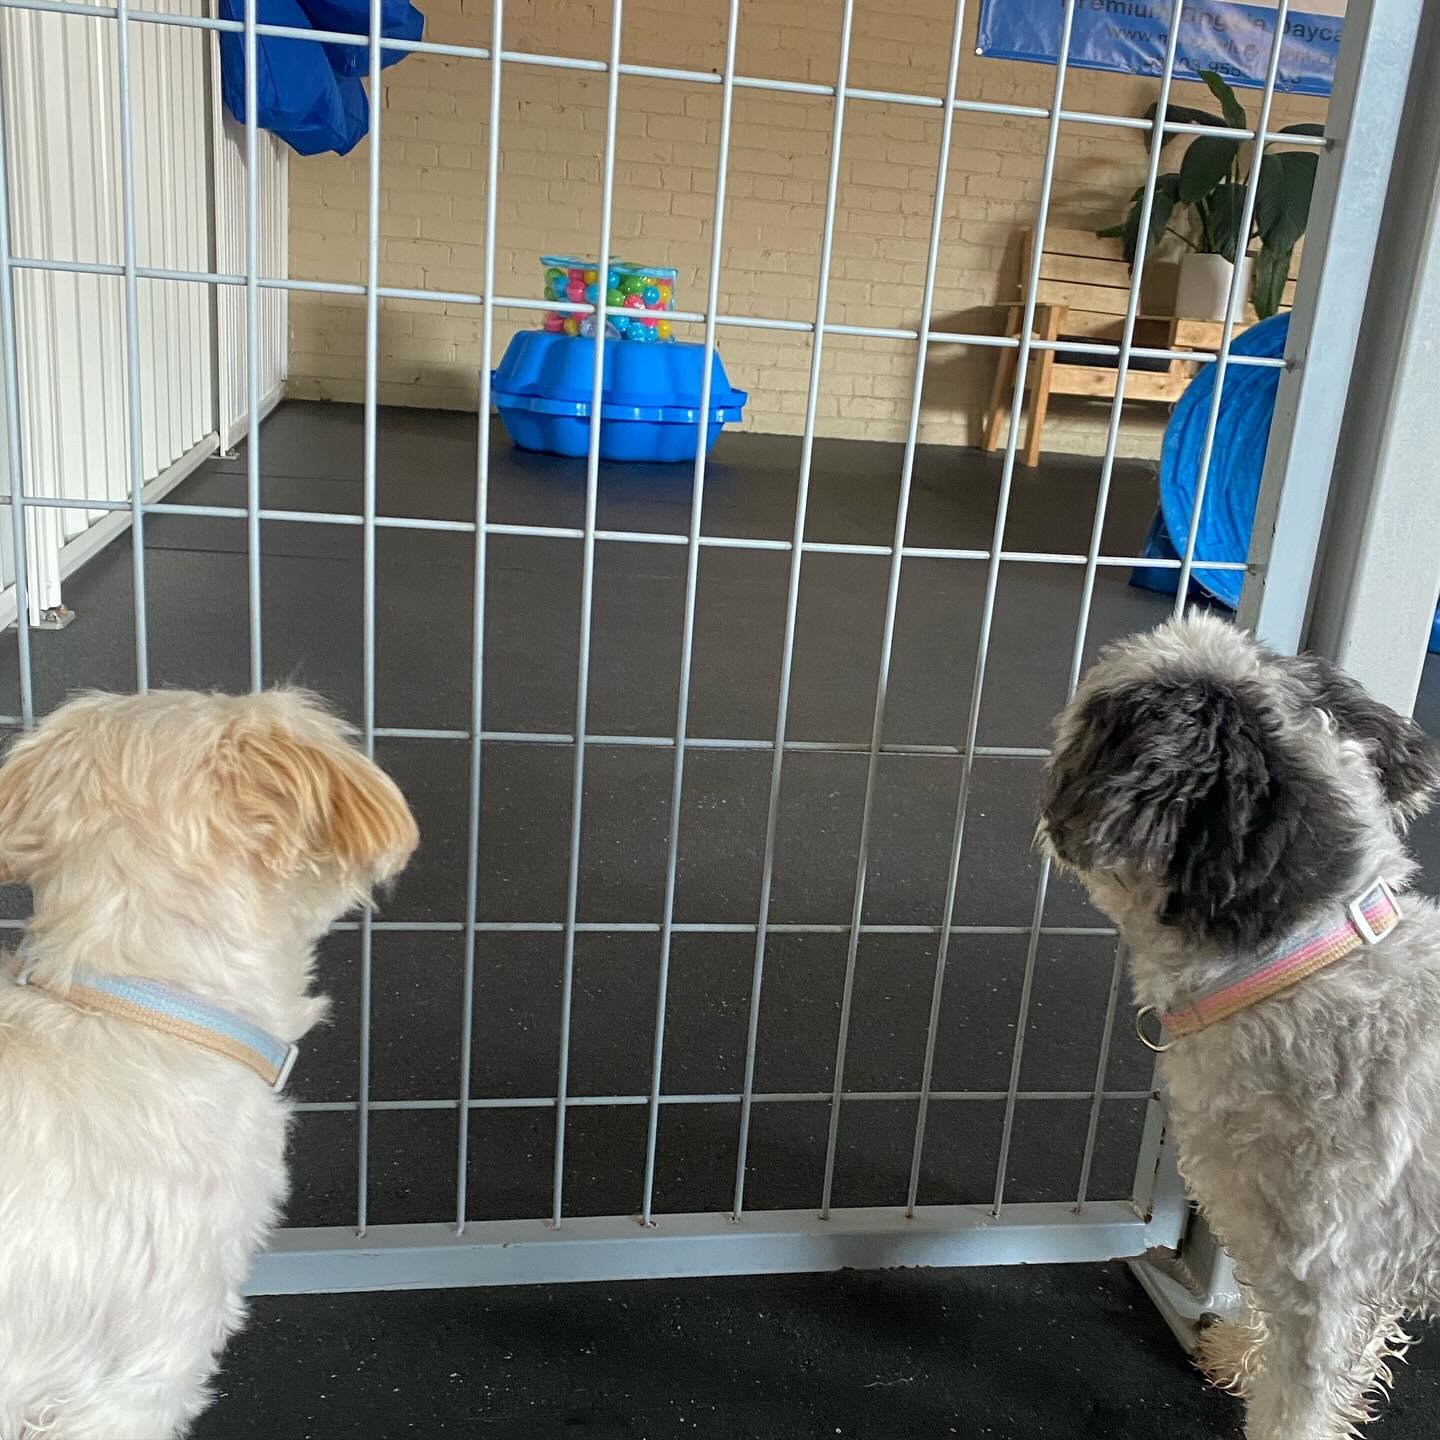 Didn&rsquo;t take long for our hardcore ball pit lovers to sniff out the new bag of balls for the ball pit! A lot of FUN had! 
.
.
#ballgames #ballpit #daycarefun #play #dogsplay #playtime #happydogs #fun #fundogs #highenergy #furfamily #dogs #furien